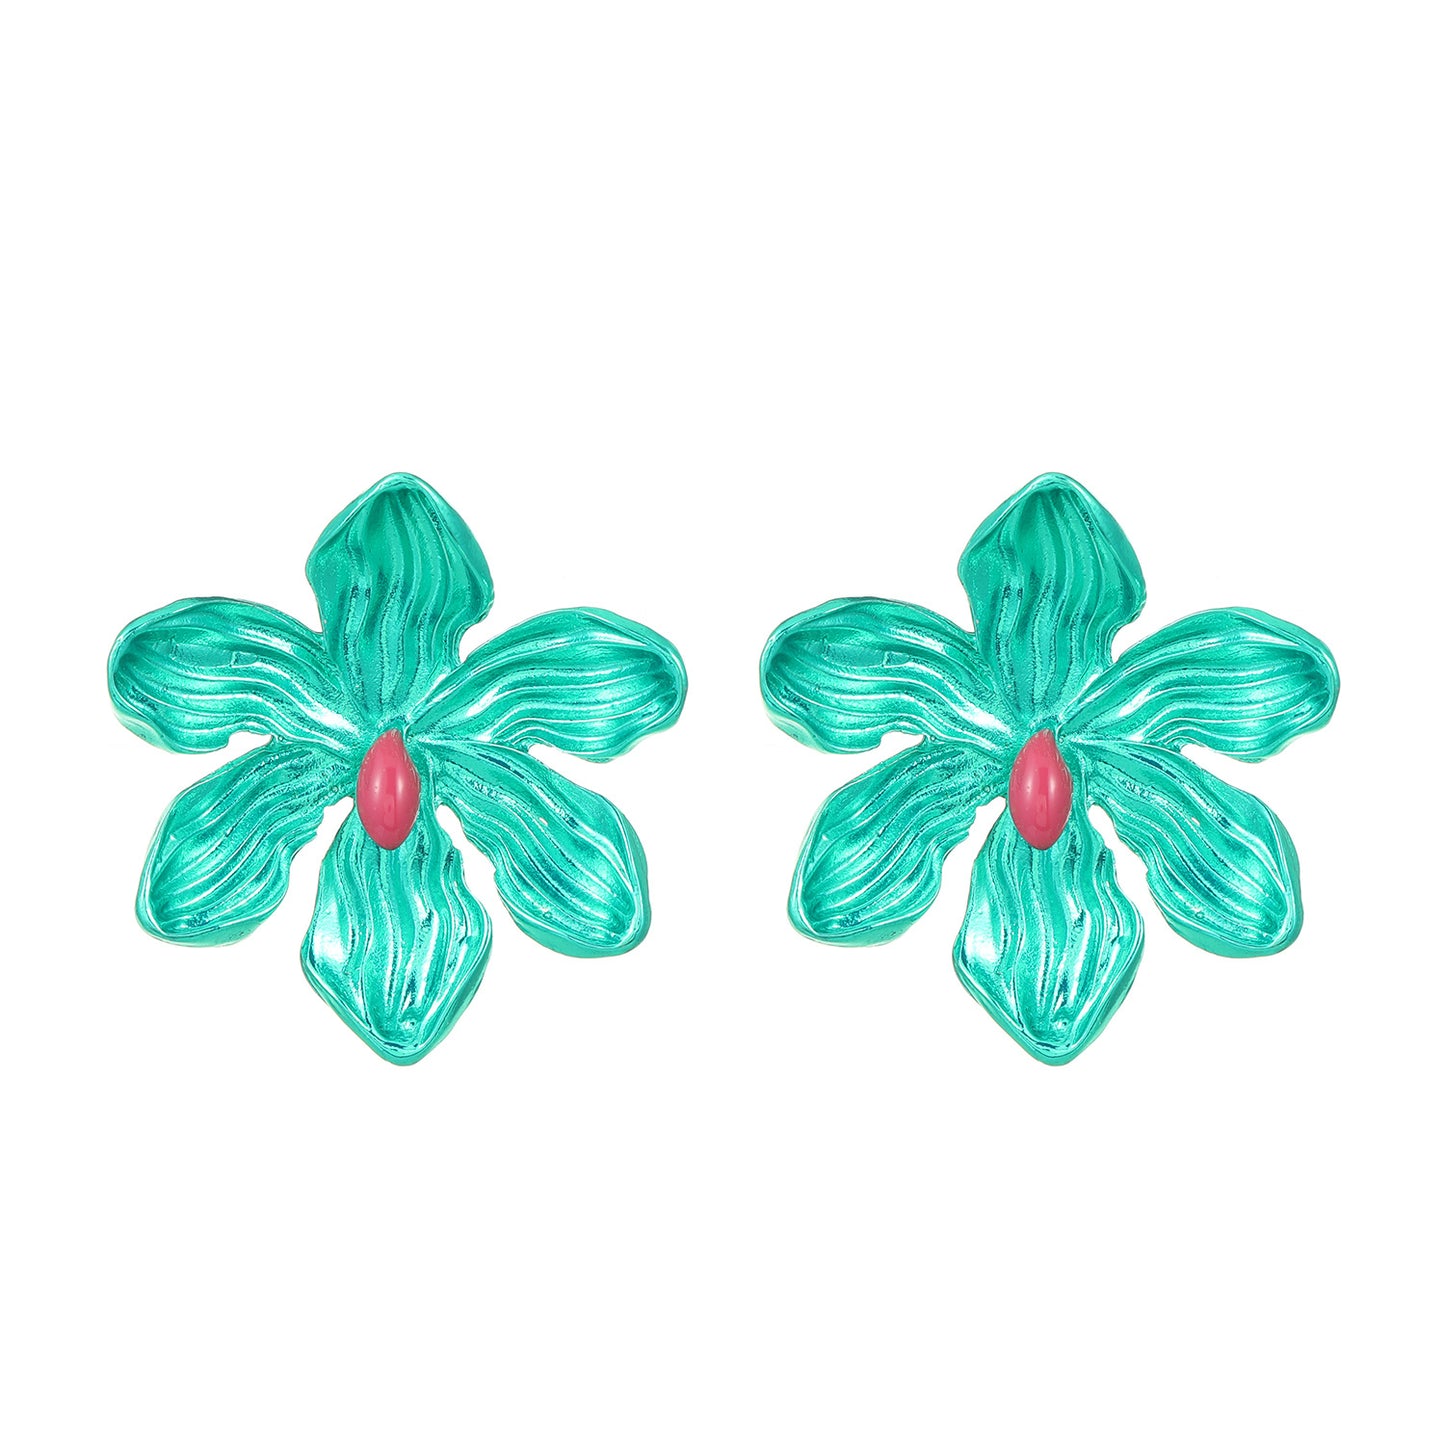 Women's Personalized Exaggerated Color Alloy Flower Barbie Earrings